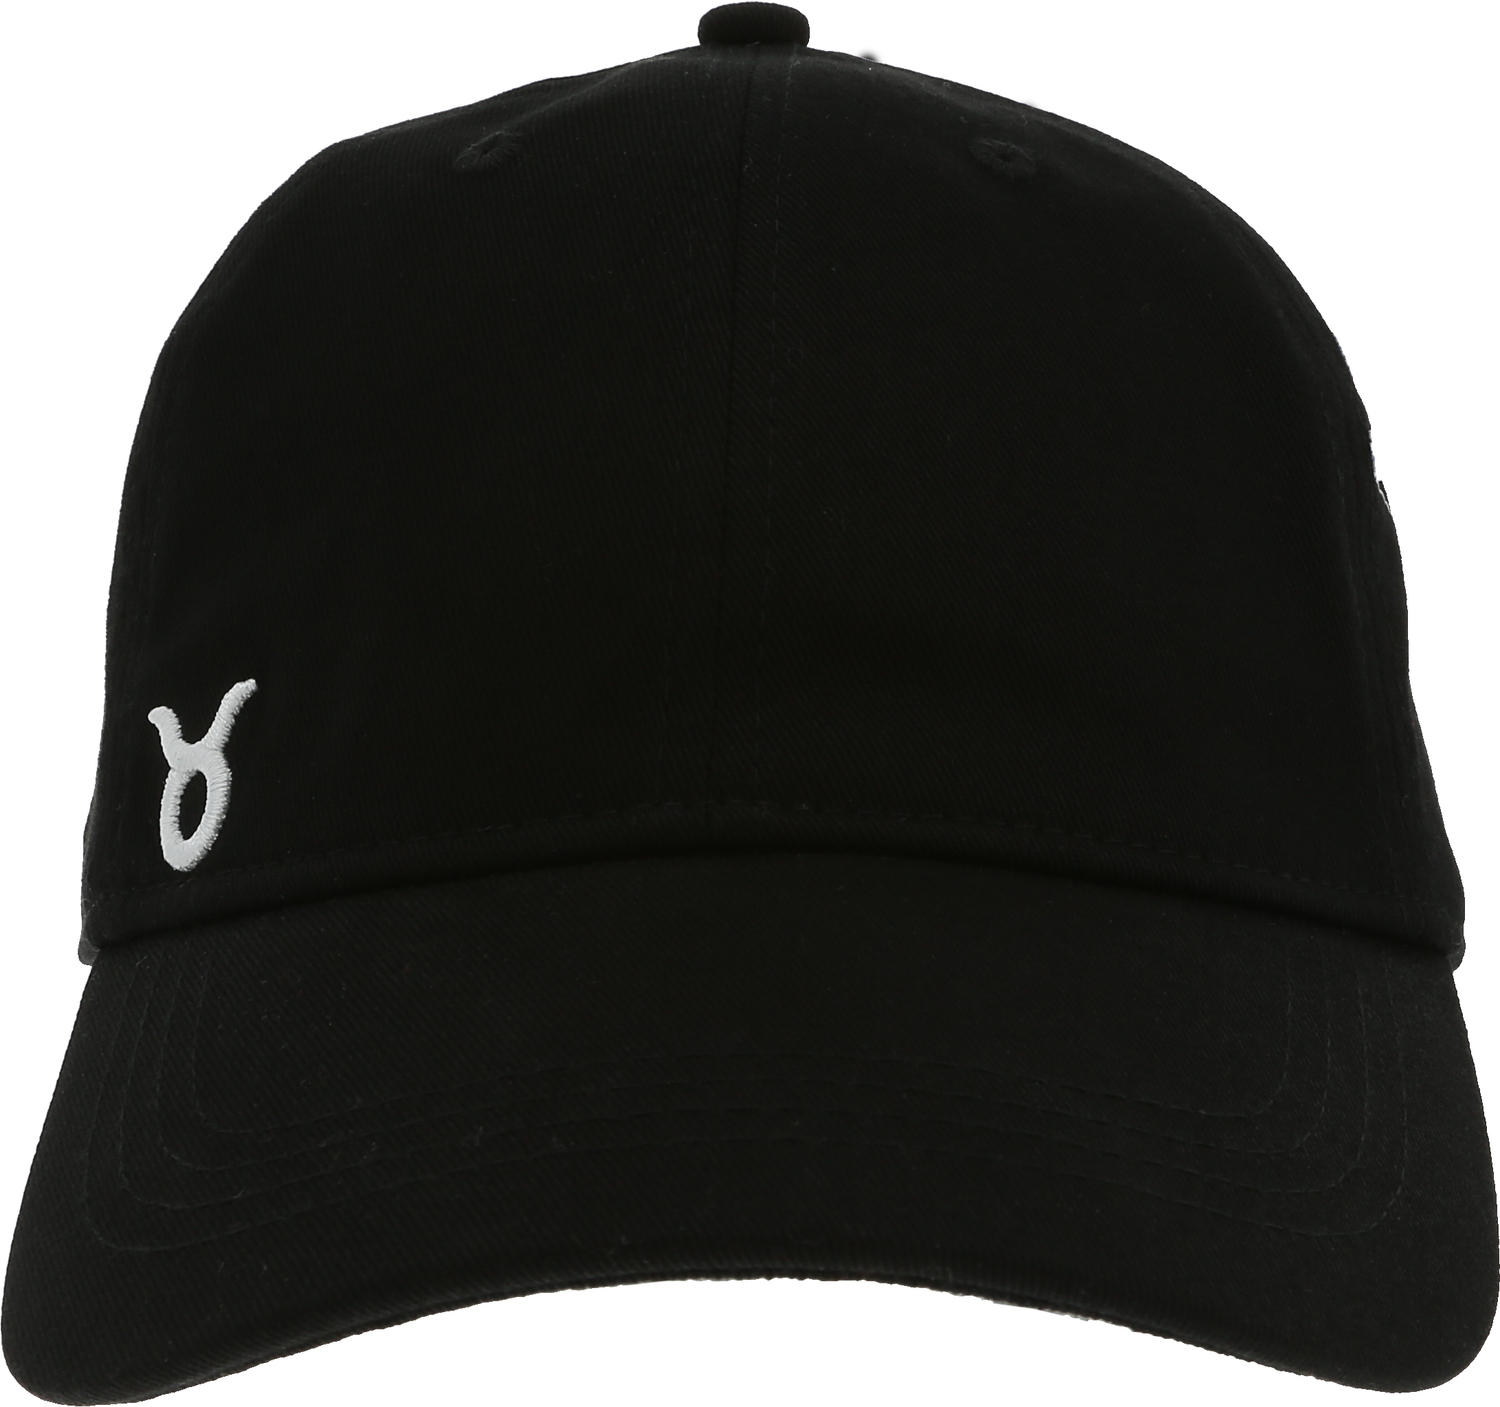 Taurus by You Are a Gem - Taurus - Black Adjustable Hat